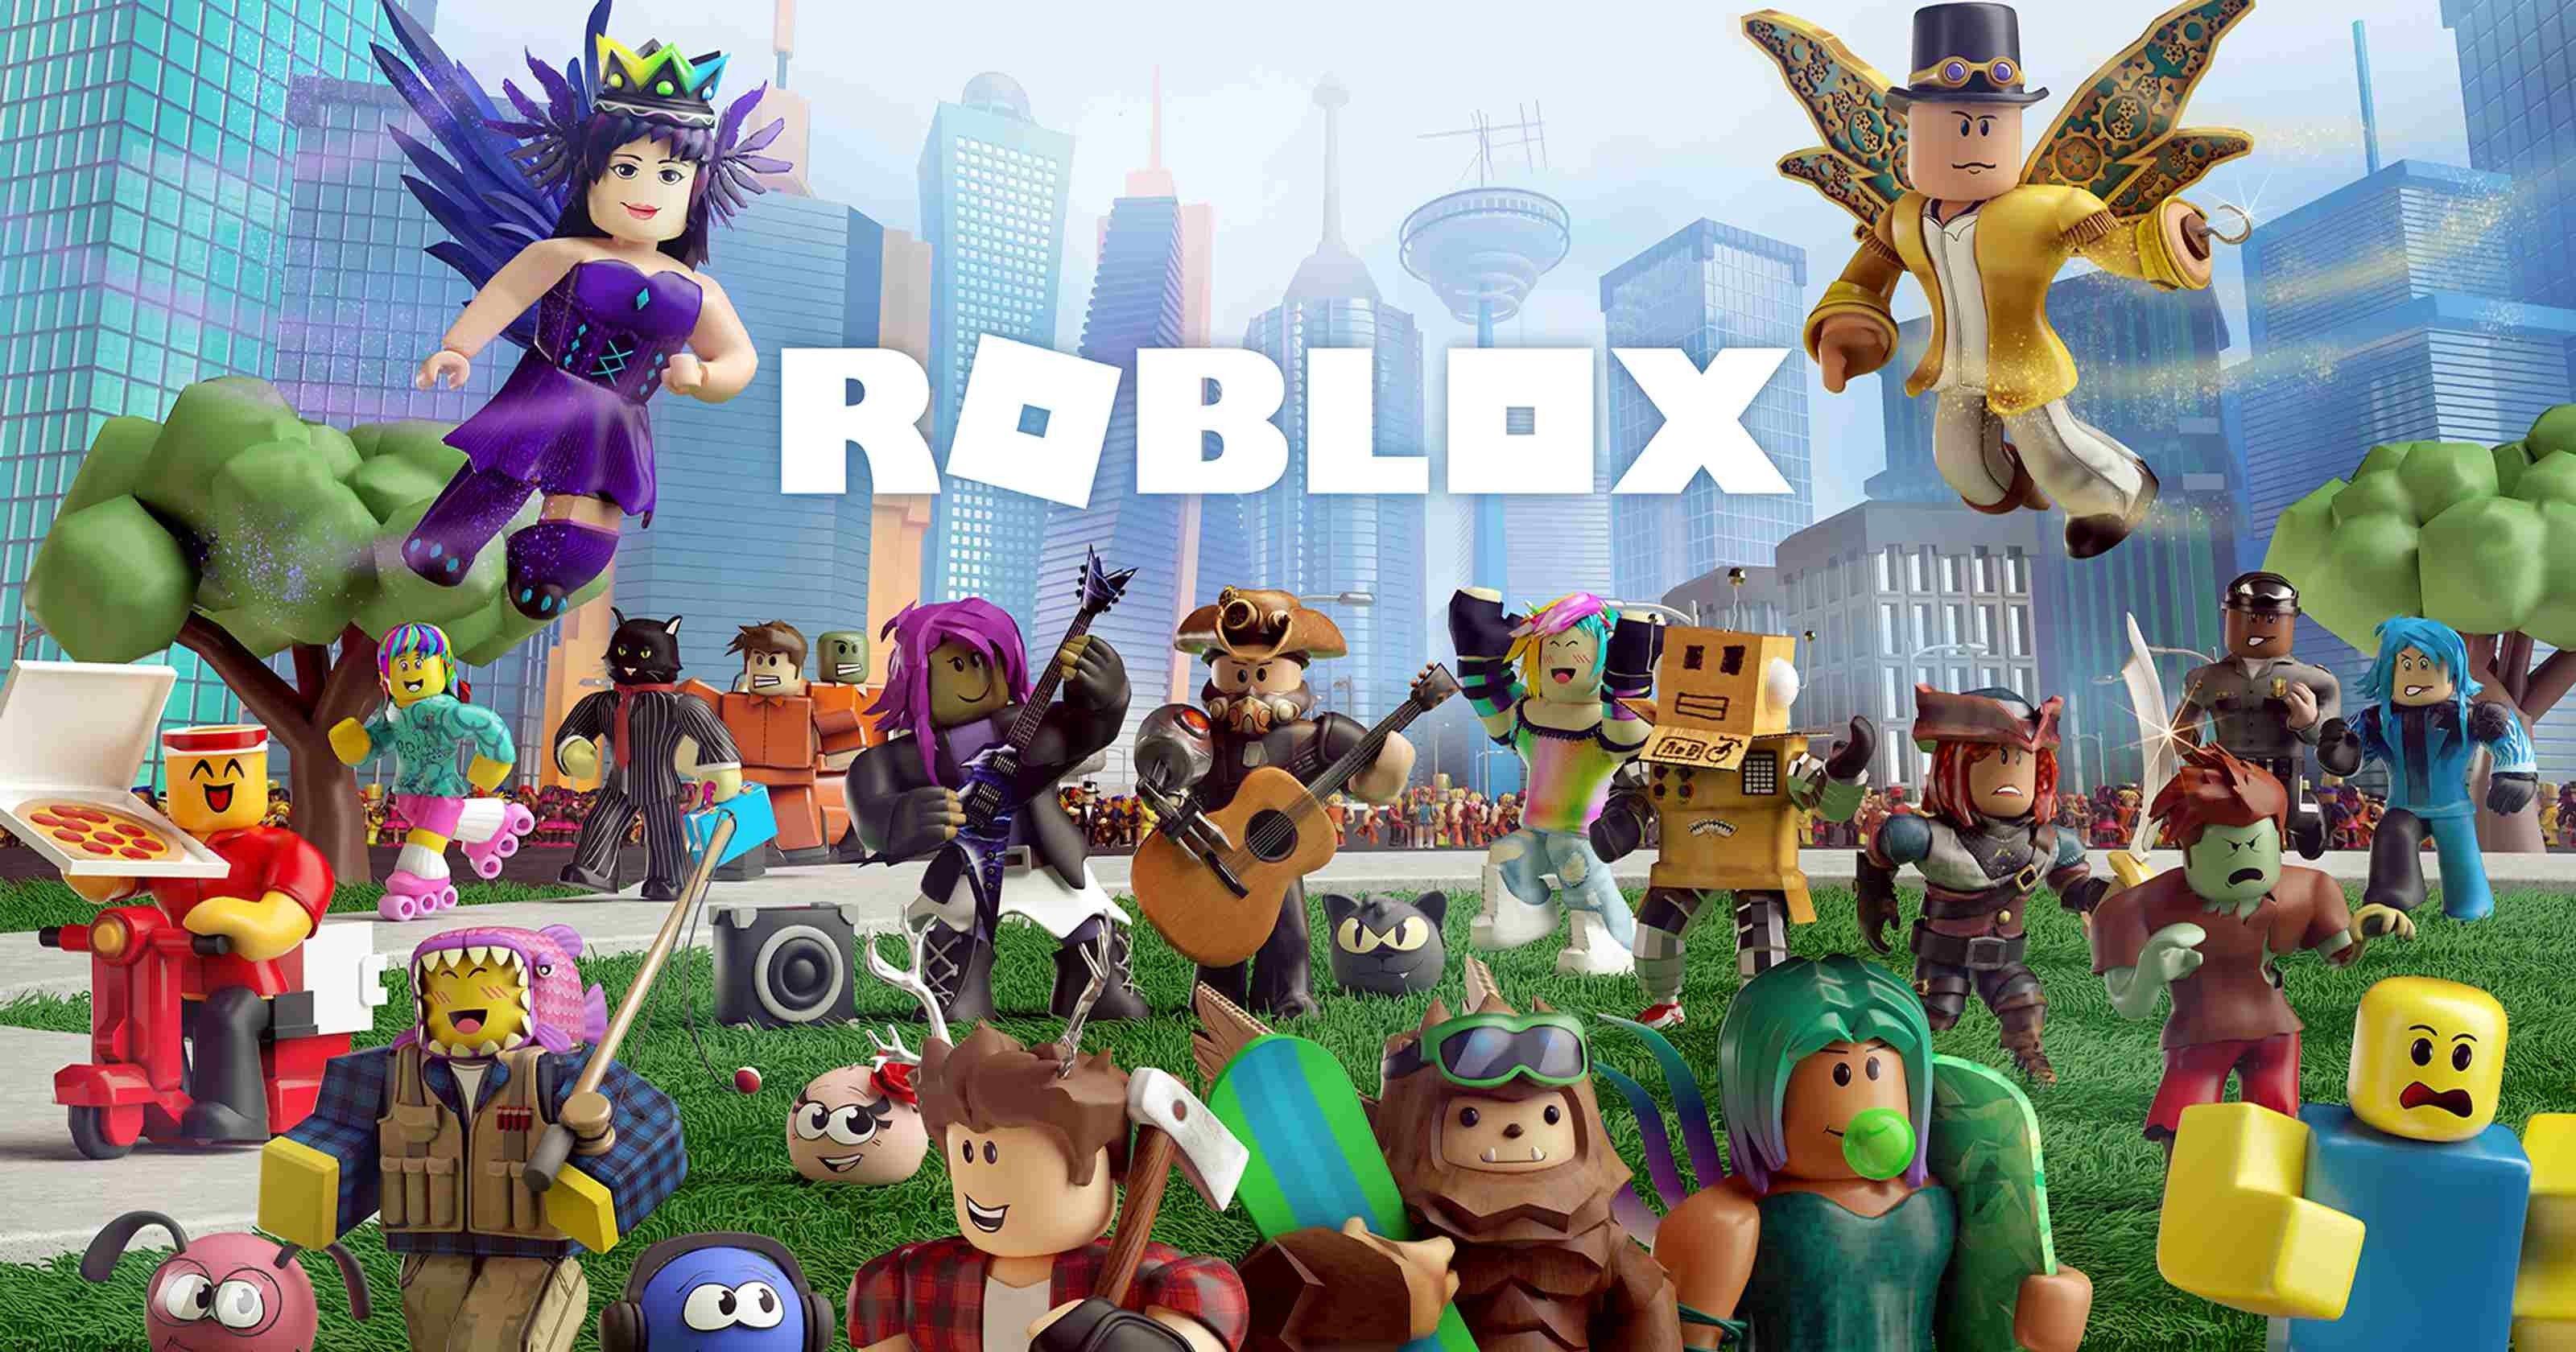 Roblox Wallpaper New Hd For Android Apk Download - roblox apk download 2018